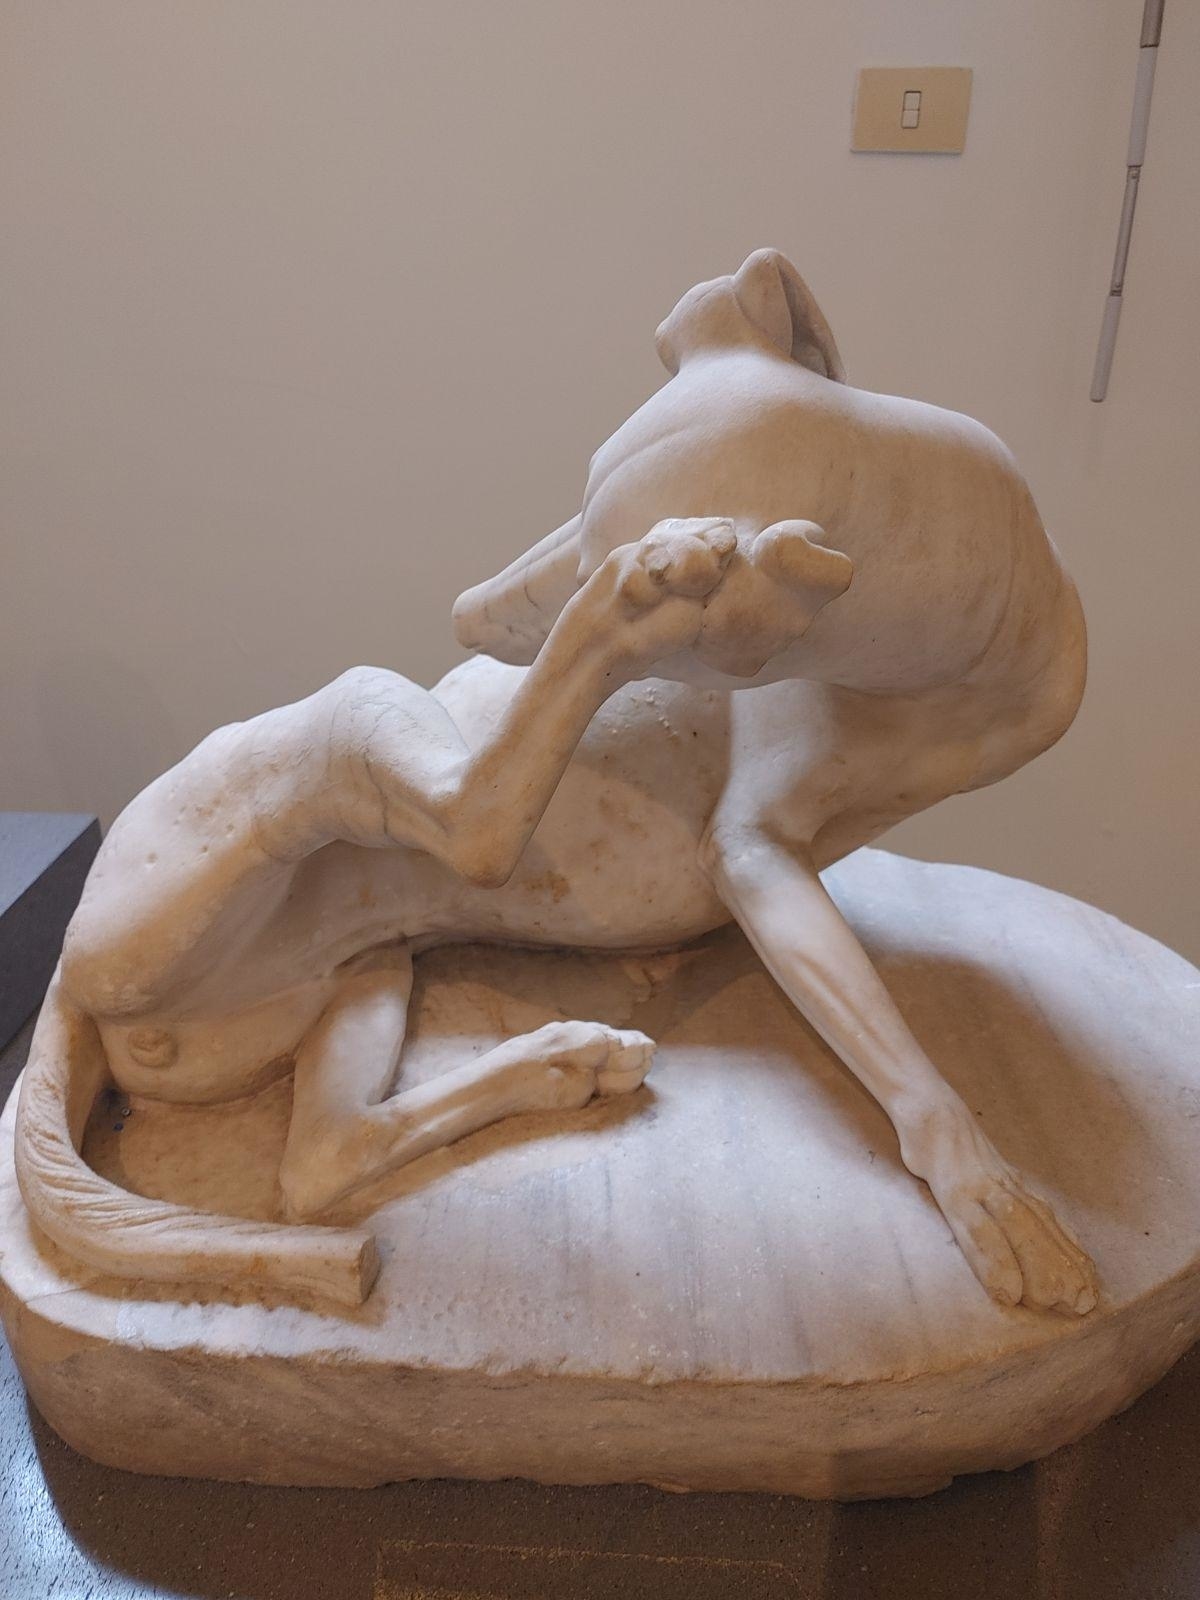 Sculpture of a dog with its leg raised and its head turned toward its torso